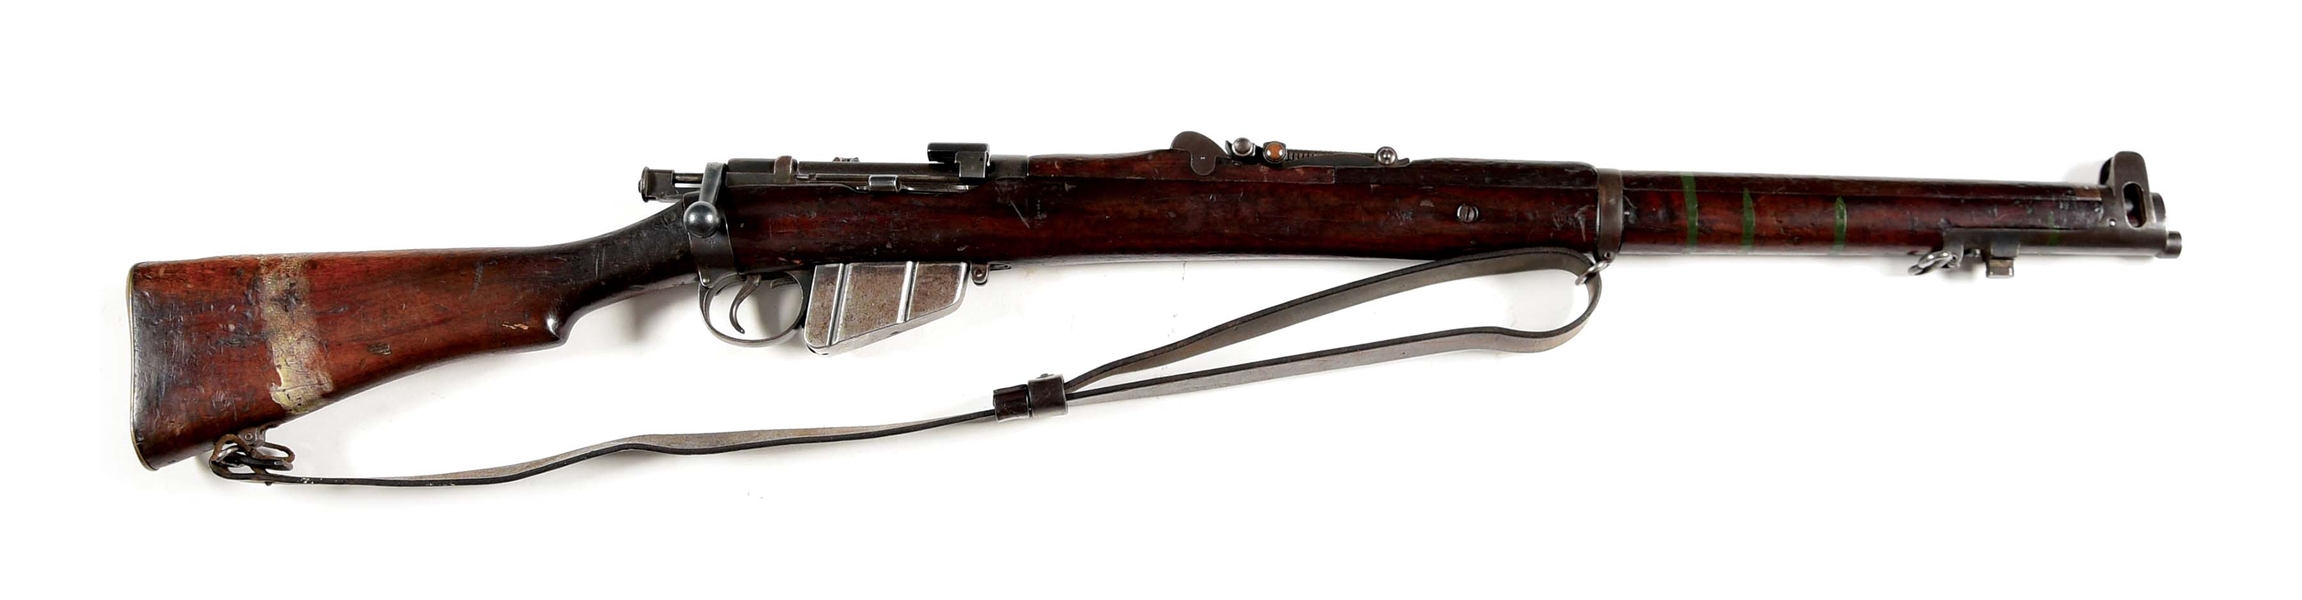 (C) SCARCE BRITISH ENFIELD SMLE COND II* .303 DATED 1901 & 1905 RIFLE. 